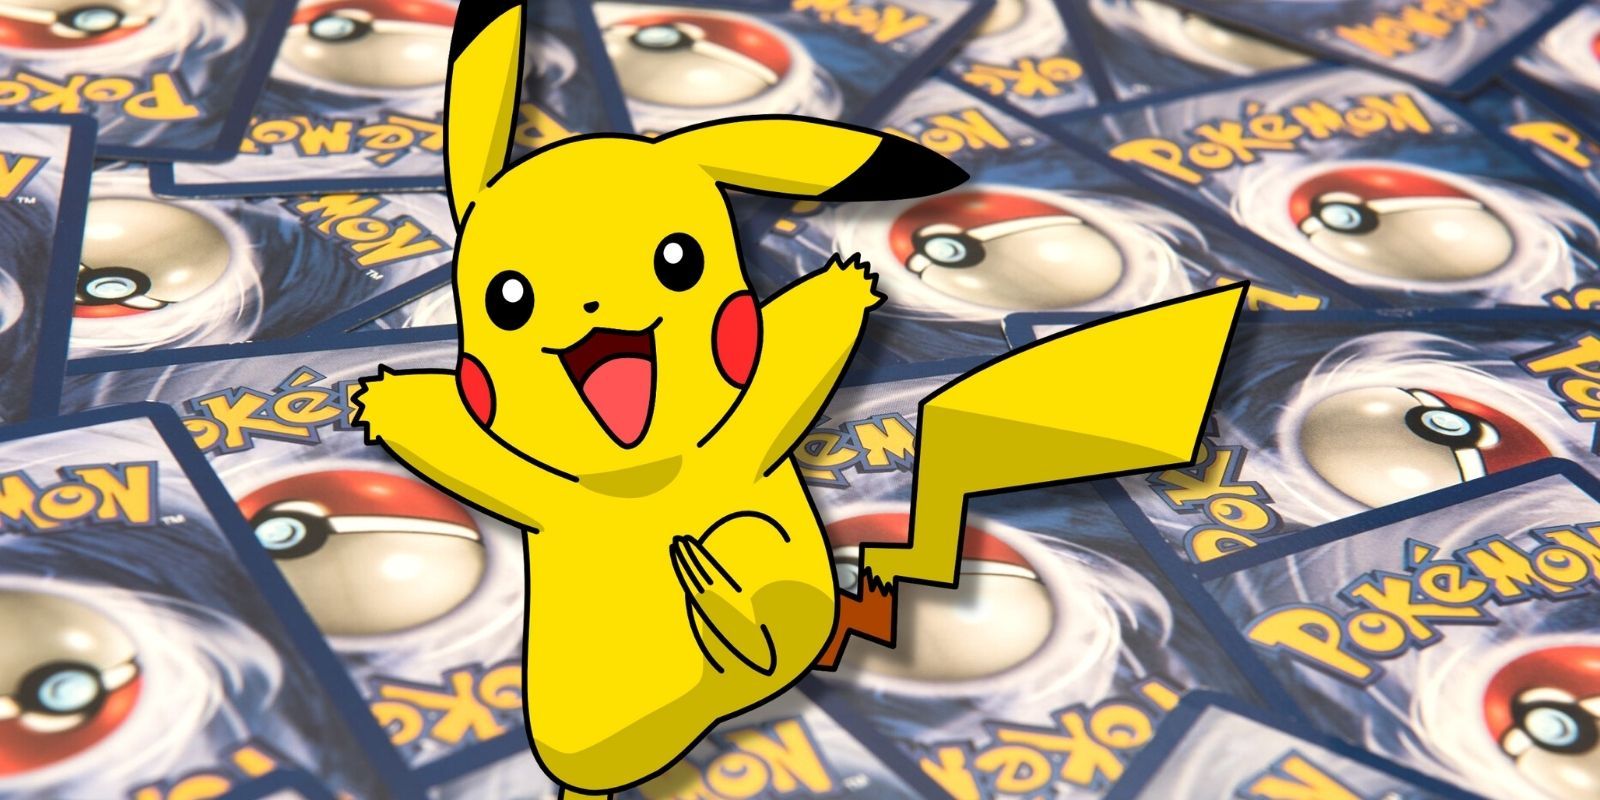 Pokémon: Rare un-cut sheet of first edition cards sold at auction